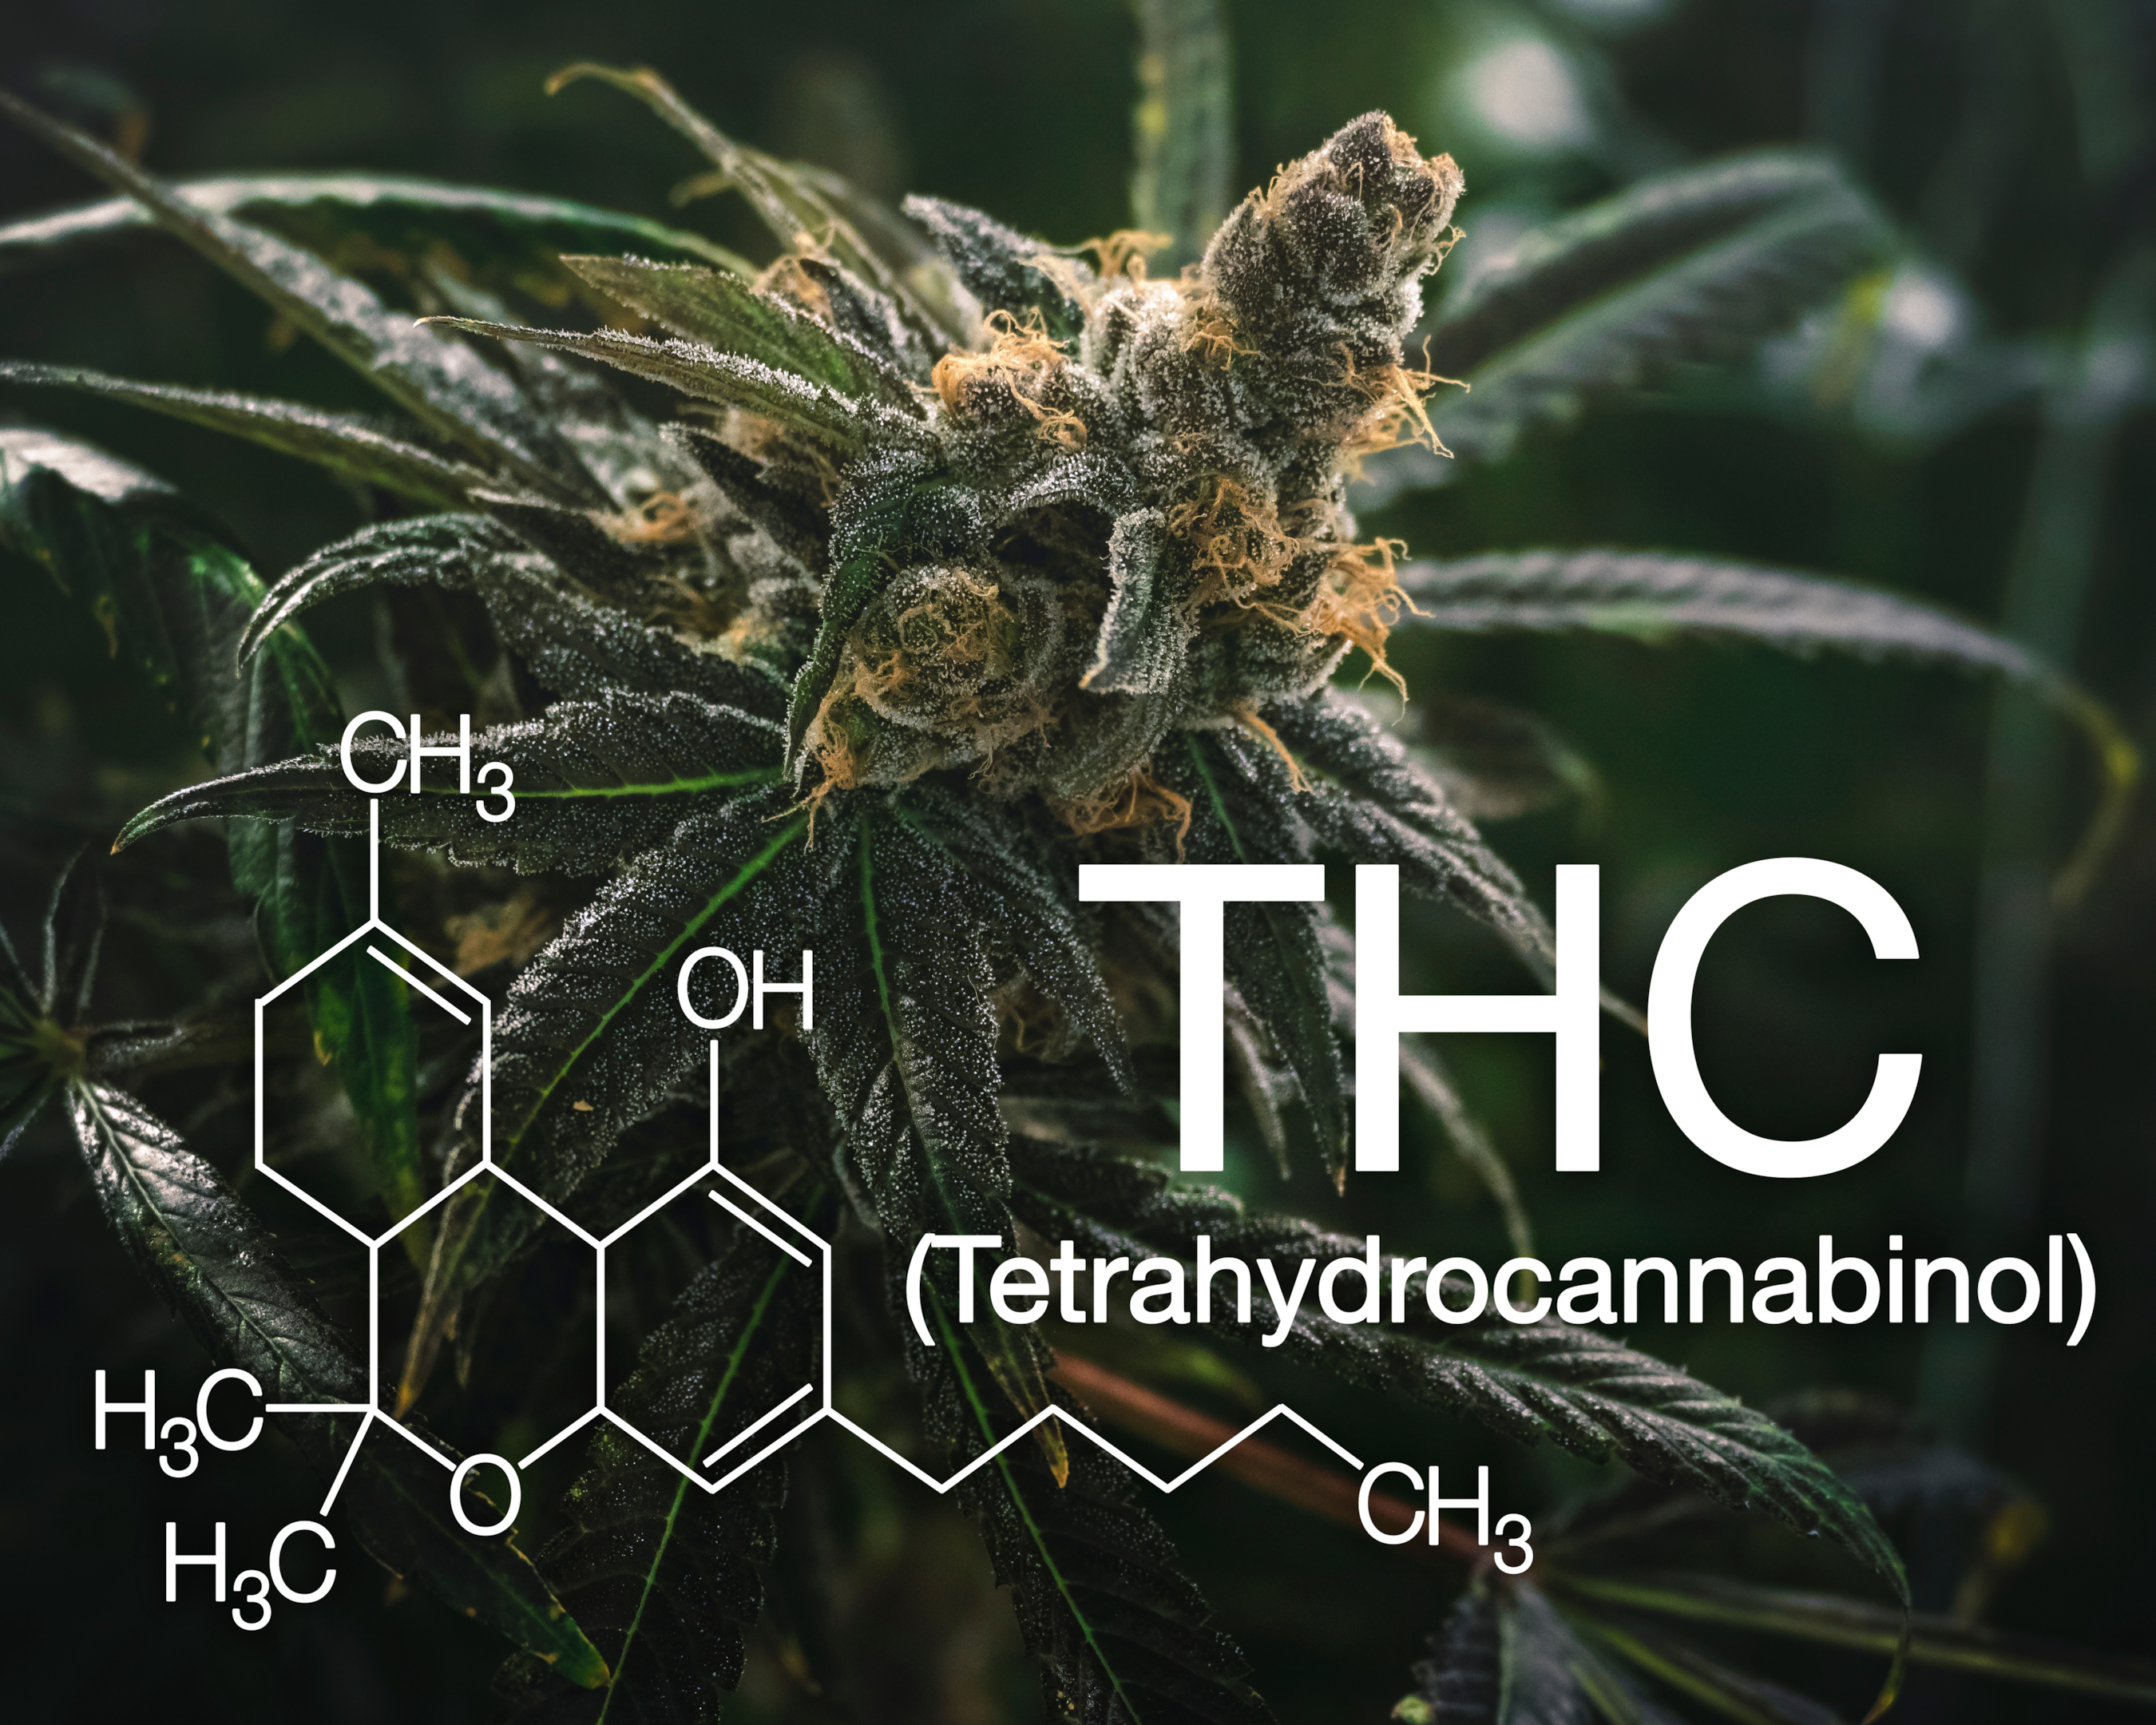 Delta 9 THC is the famous psychoactive compound found in marijuana. Delta 9 is in our gummies, so long as the Delta 9 content doesn't exceed 0.3%.